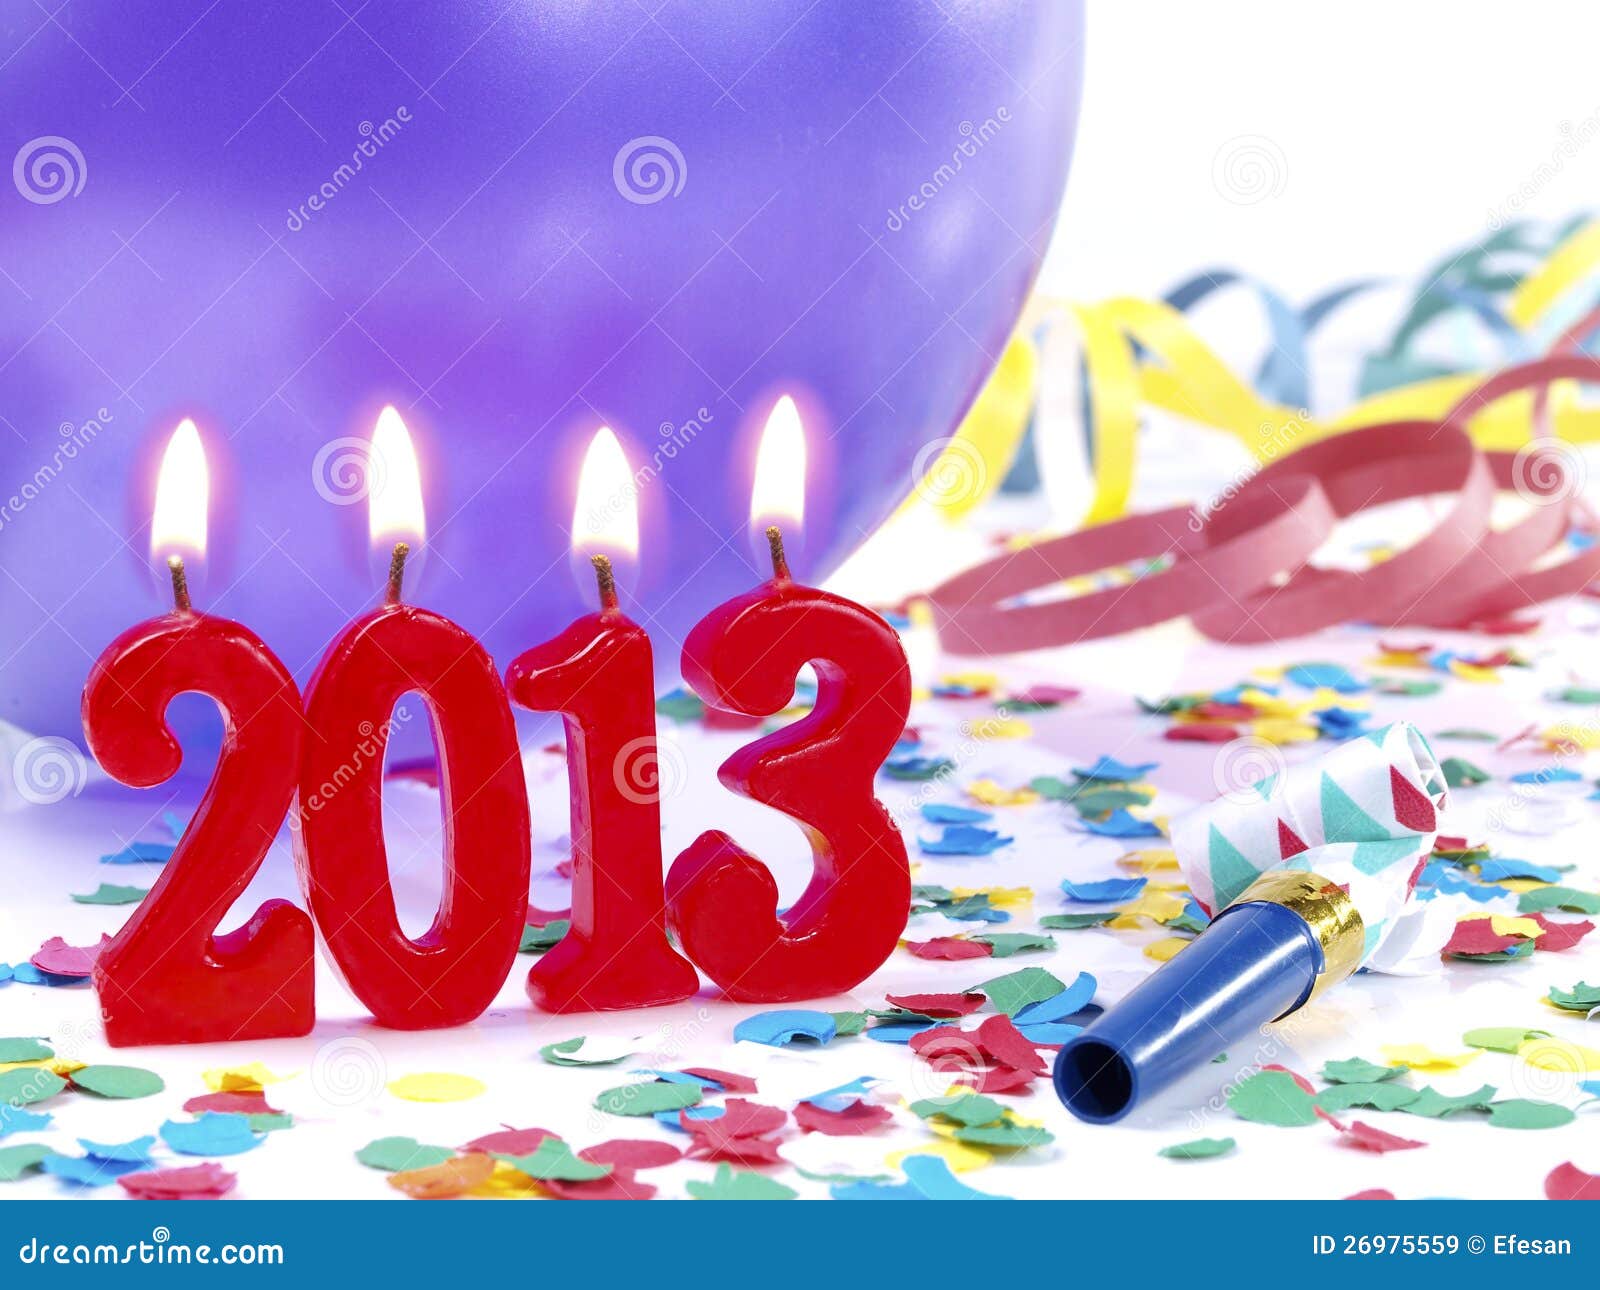 clipart new years eve 2014 - photo #38